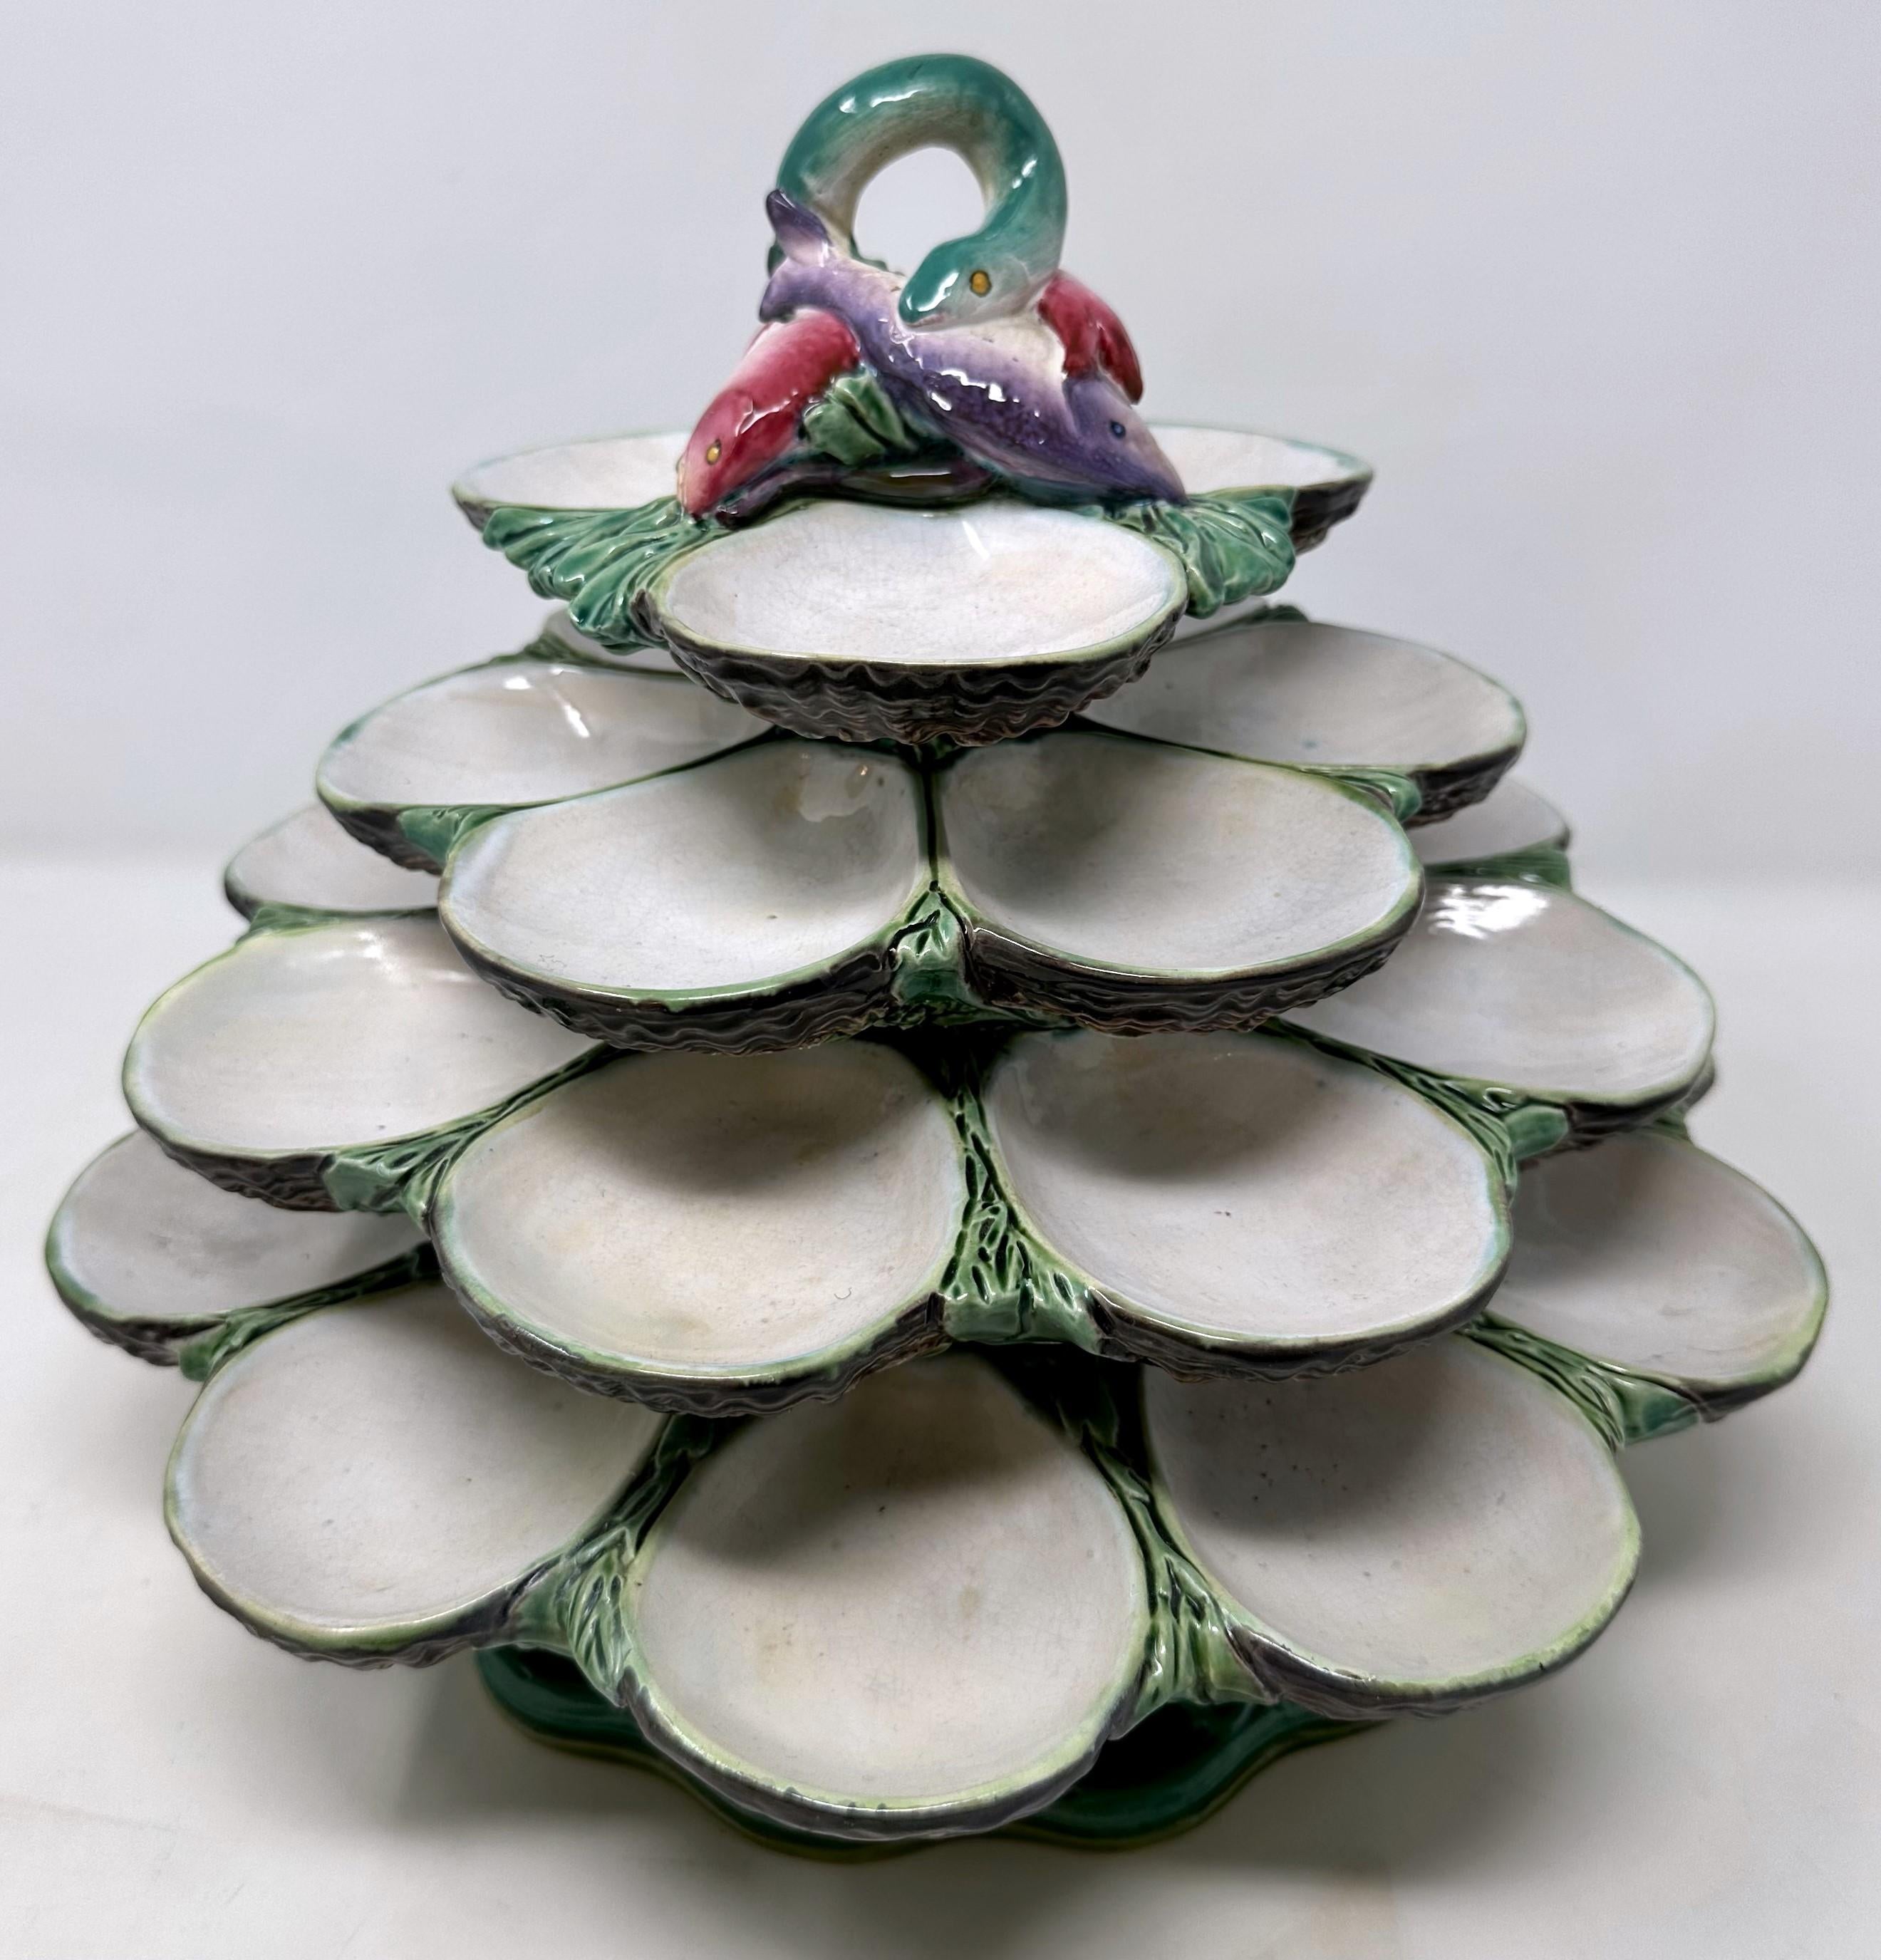 Rare Antique English Thomas Minton Majolica Porcelain Revolving 4 Tier Oyster Server, Circa 1870-1880.
Hand-Painted and Molded in the Art Nouveau Style with Colors of Blue, Green, Purple, Pink and Brown.
The revolving mechanism works beautifully and